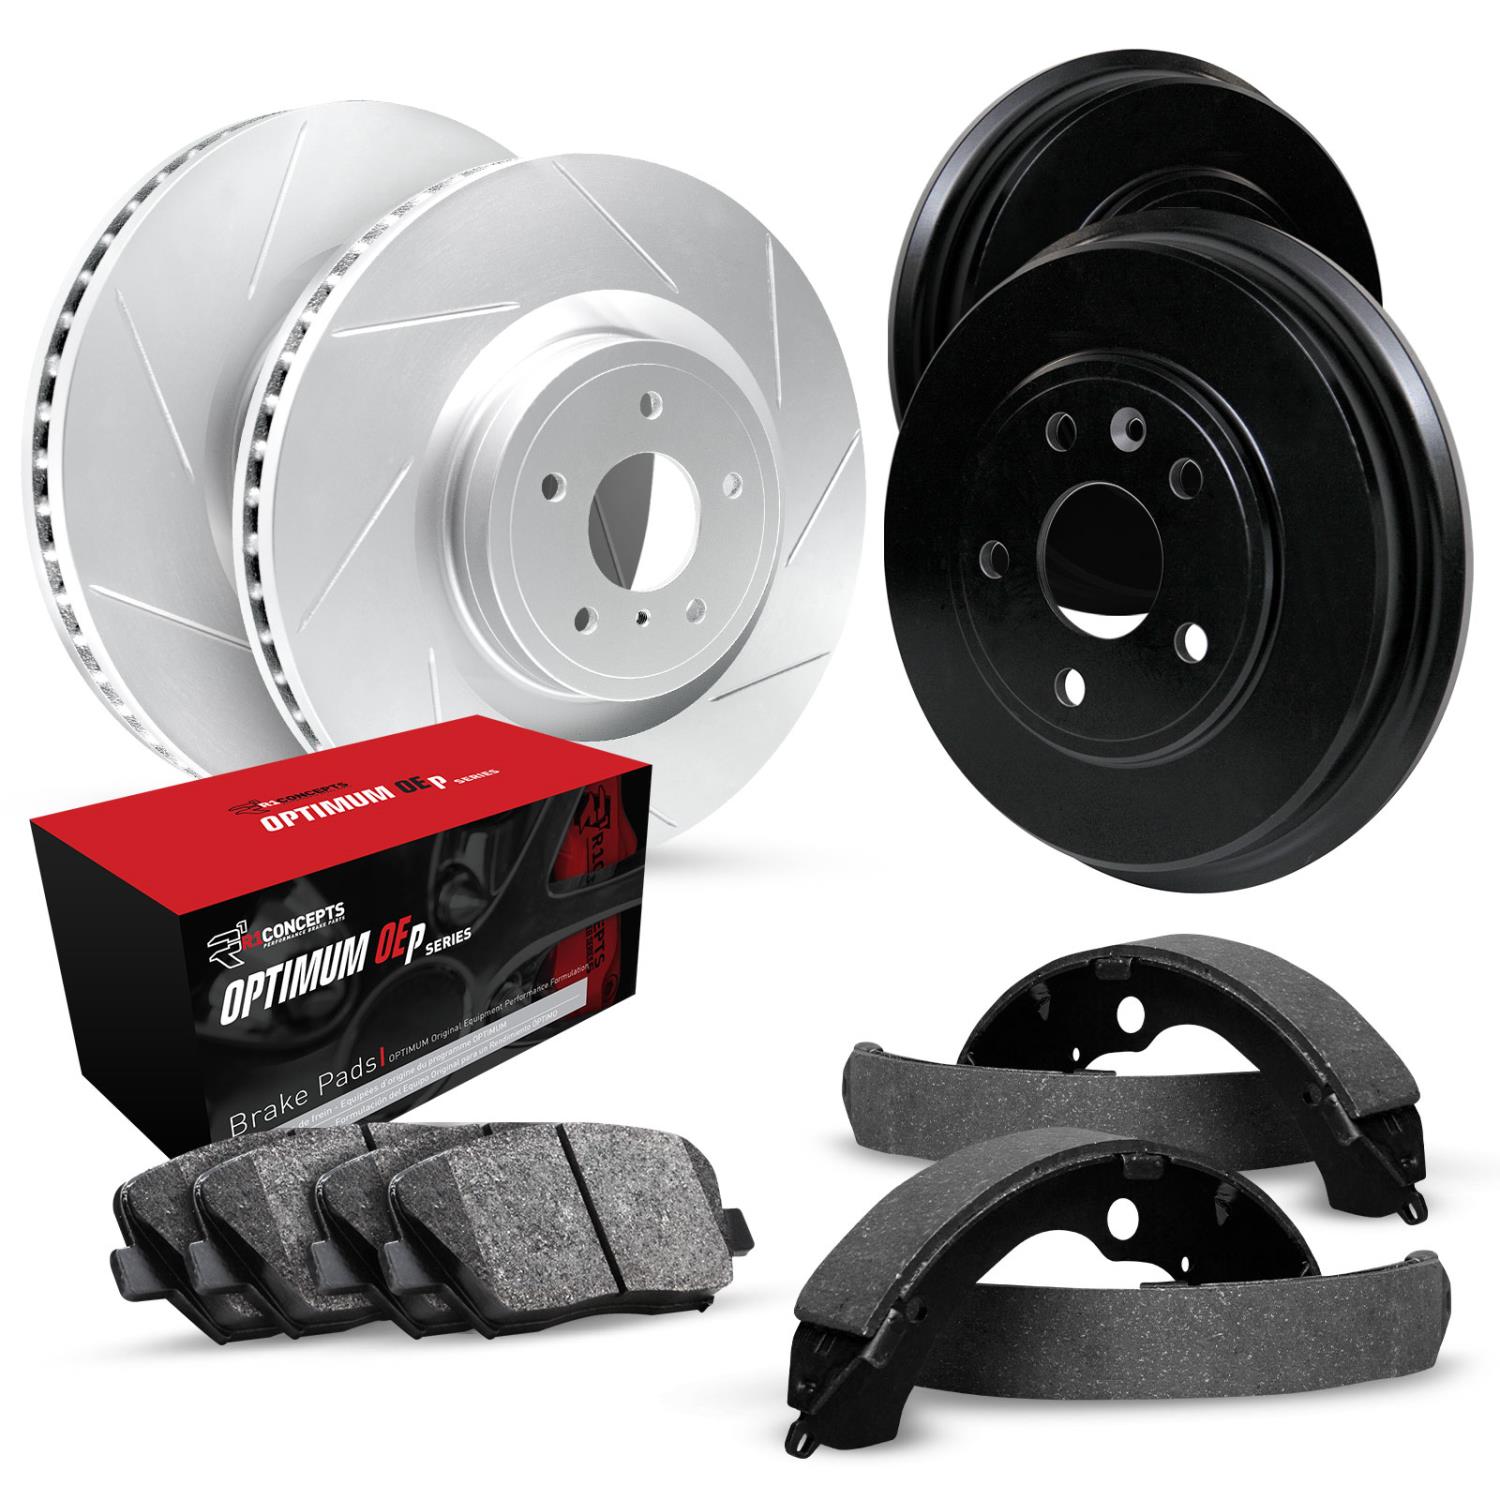 GEO-Carbon Slotted Brake Rotor & Drum Set w/Optimum OE Pads & Shoes, 2004-2010 Lexus/Toyota/Scion, Position: Front & Rear